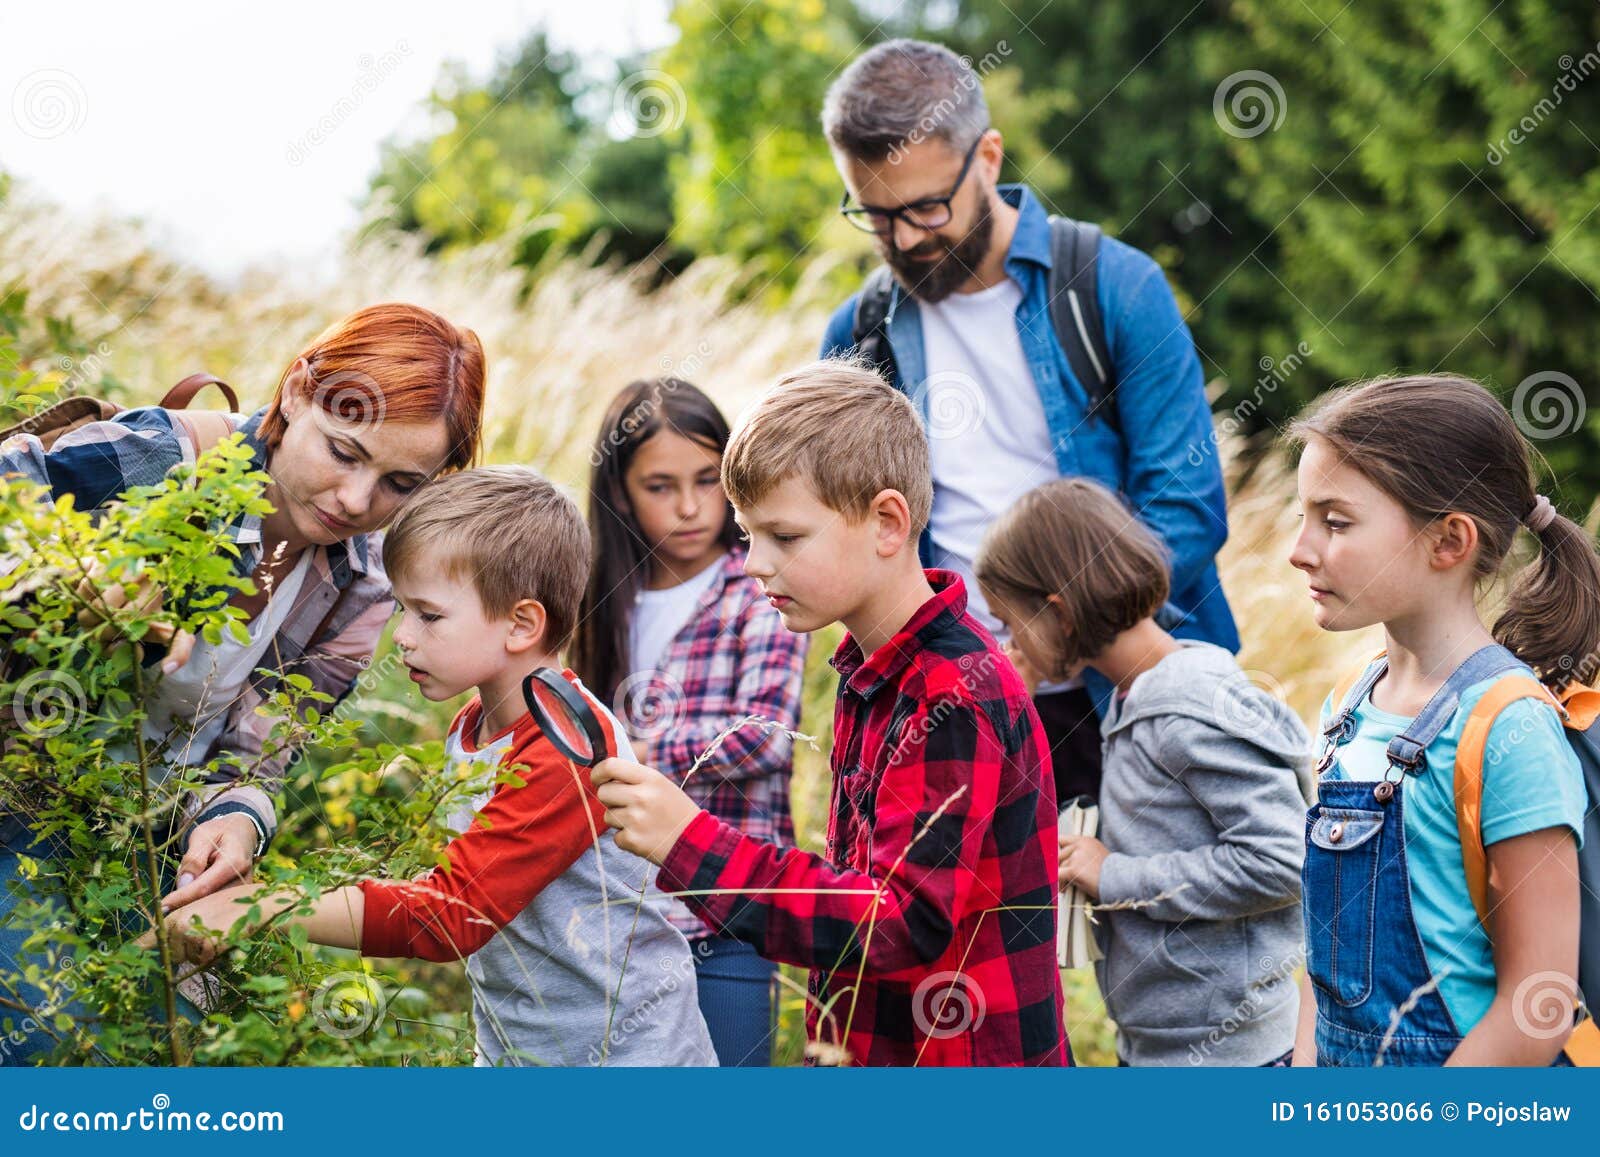 Children Science Nature Photos - Free Royalty-Free Stock from Dreamstime